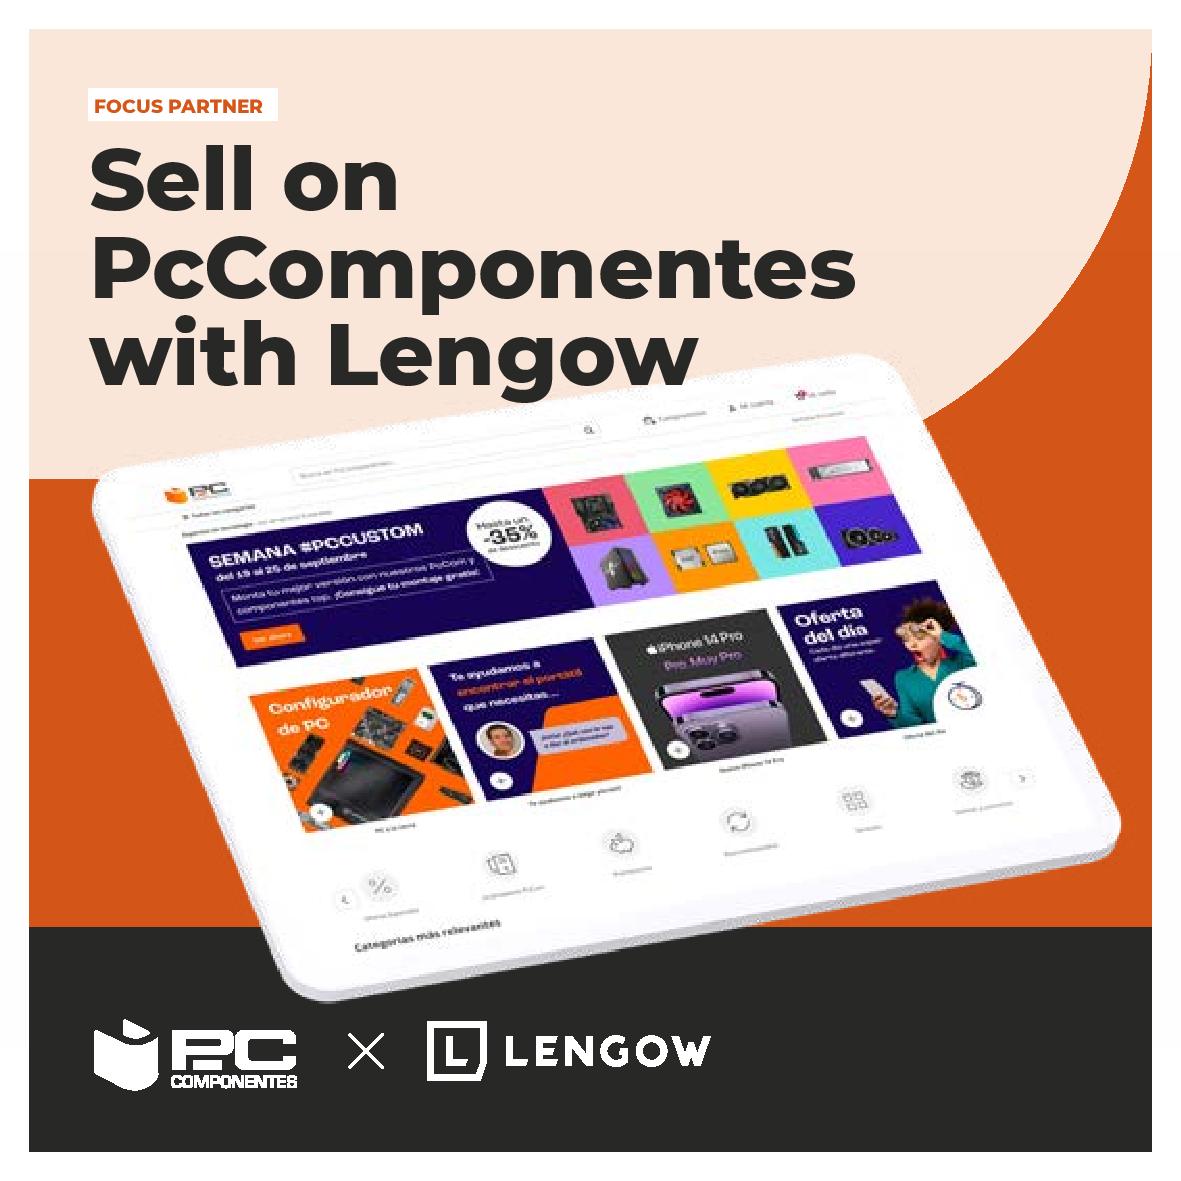 Sell on PcComponentes